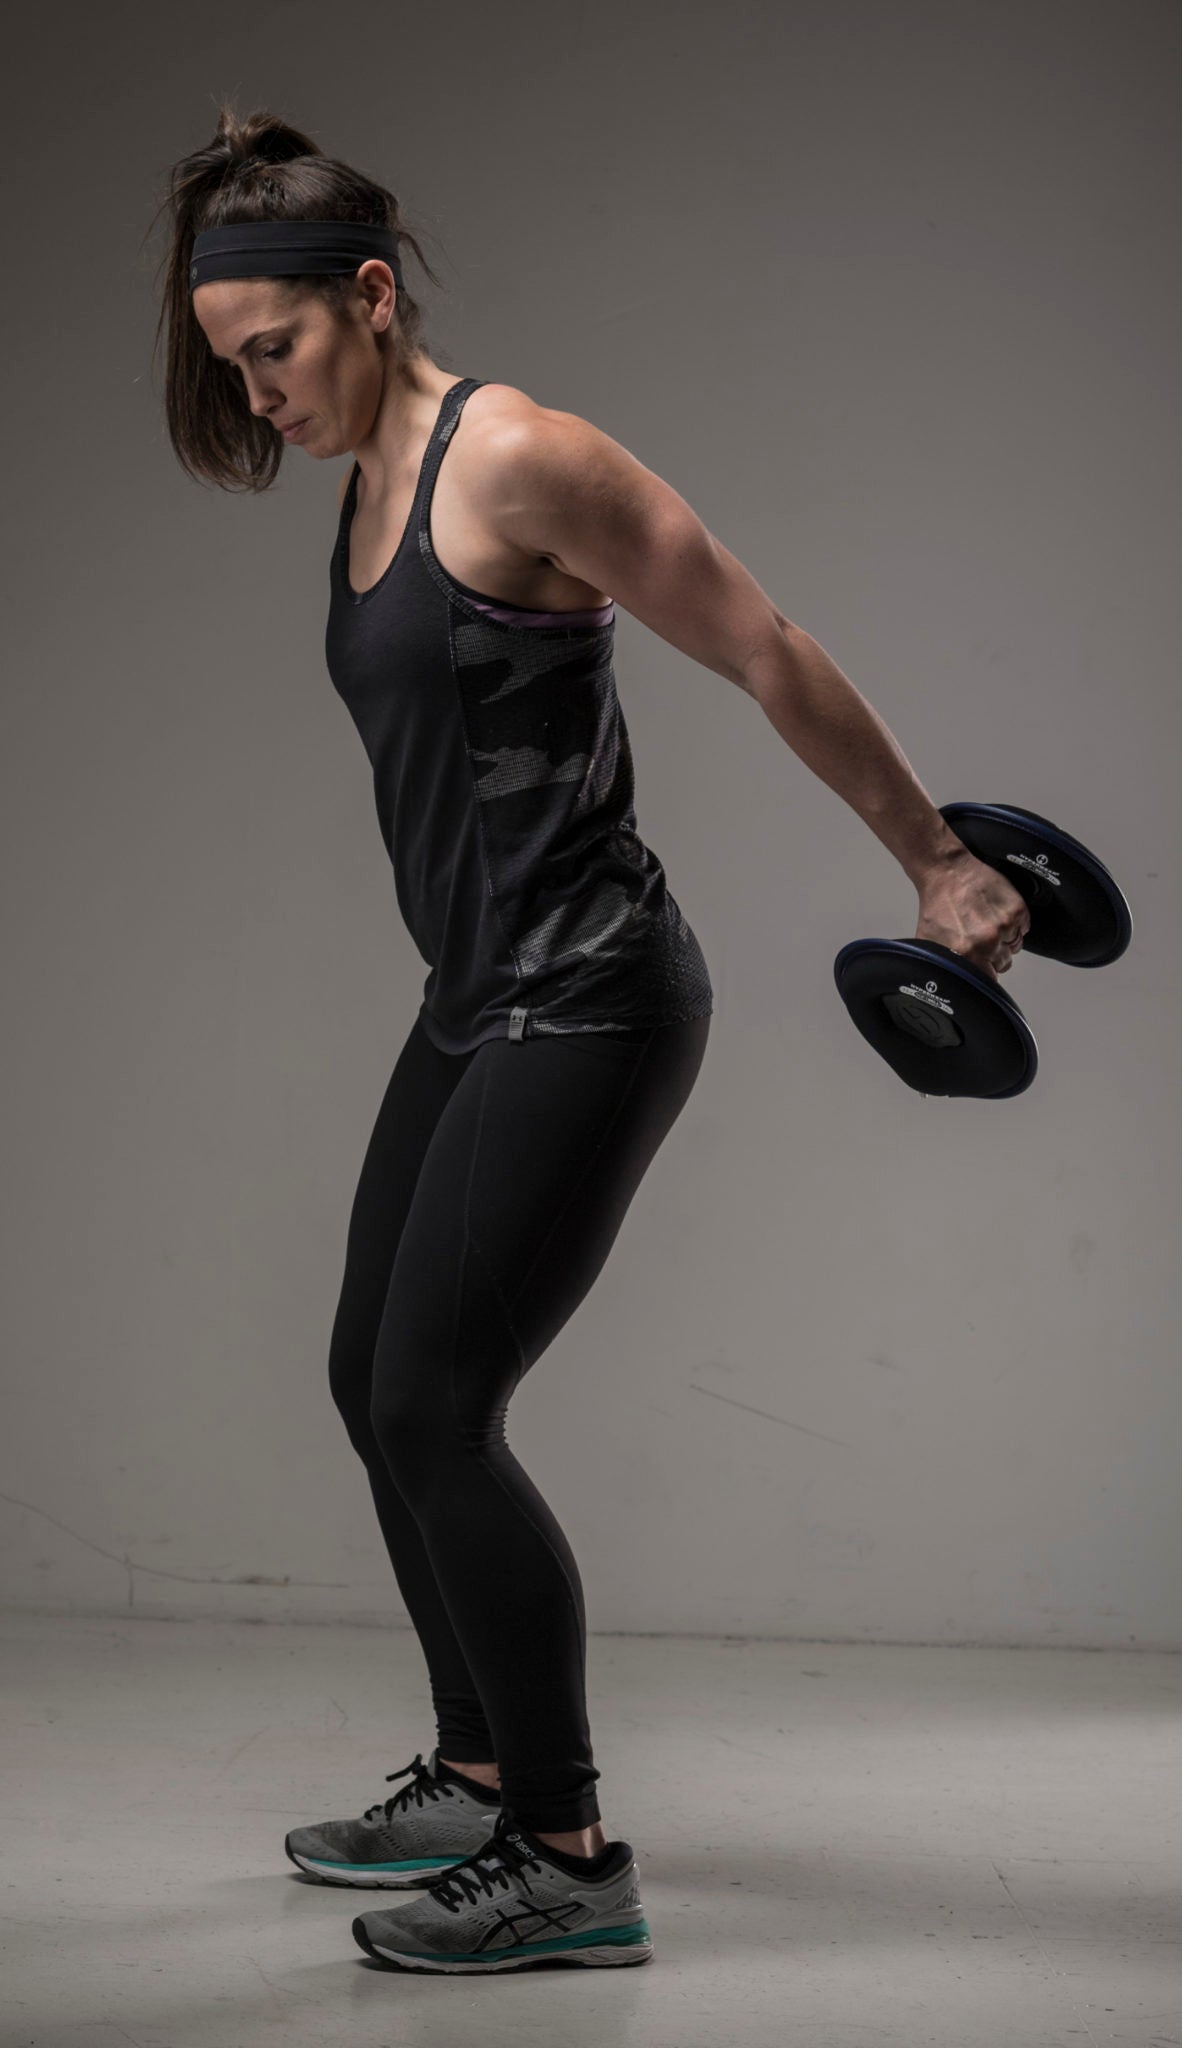 Image of female fitness model standing doing a back tricep extension with an adjustable dumbbell from Hyperwear